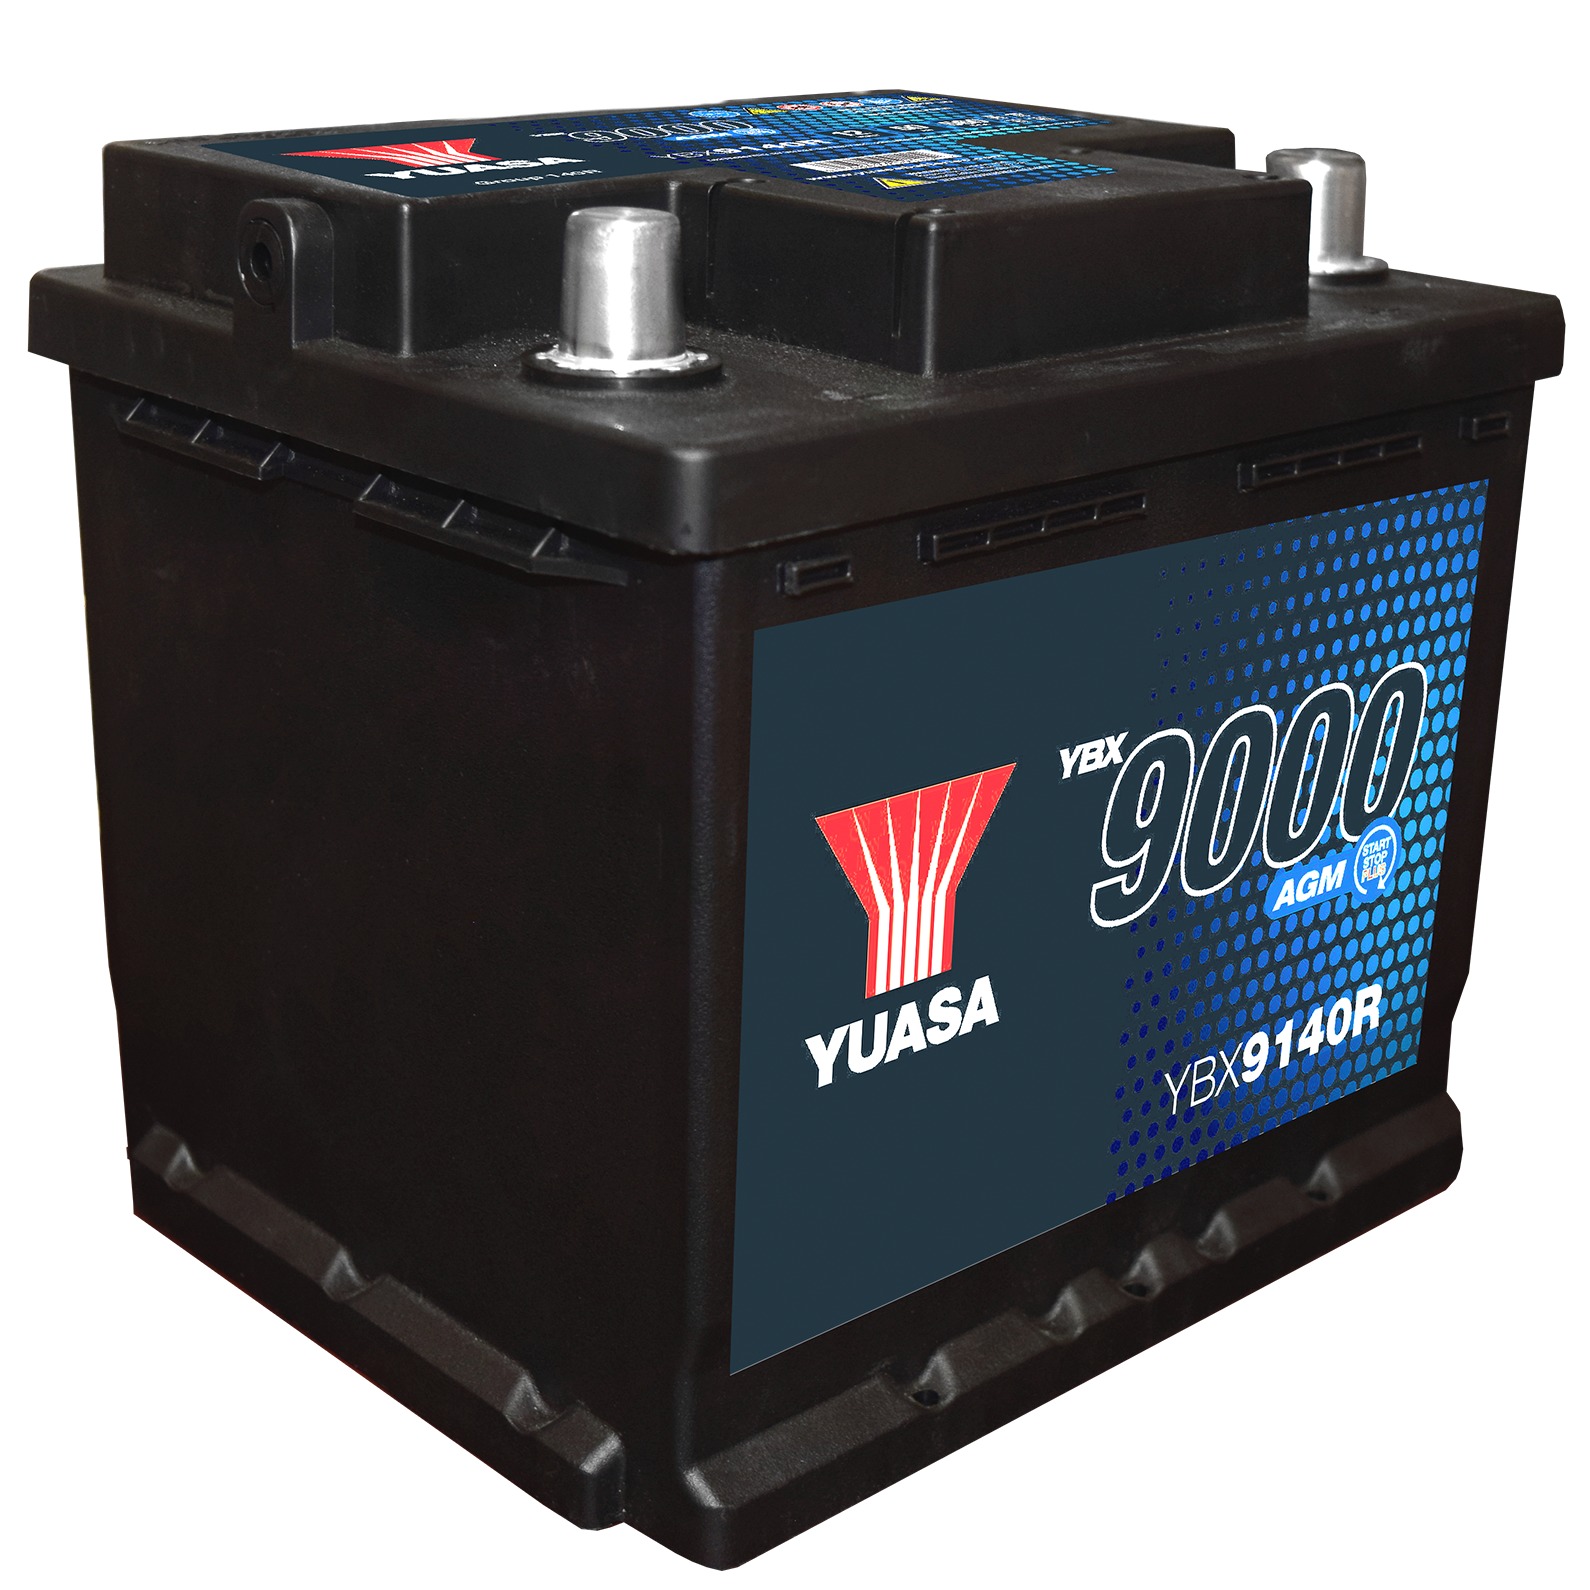 YBX9000 YBX9140R AGM Battery - 560 CCA, 50 Ah, Replaces 4014132-P - Includes Battery Hold-Down Bracket For Polaris RZR - Click Image to Close